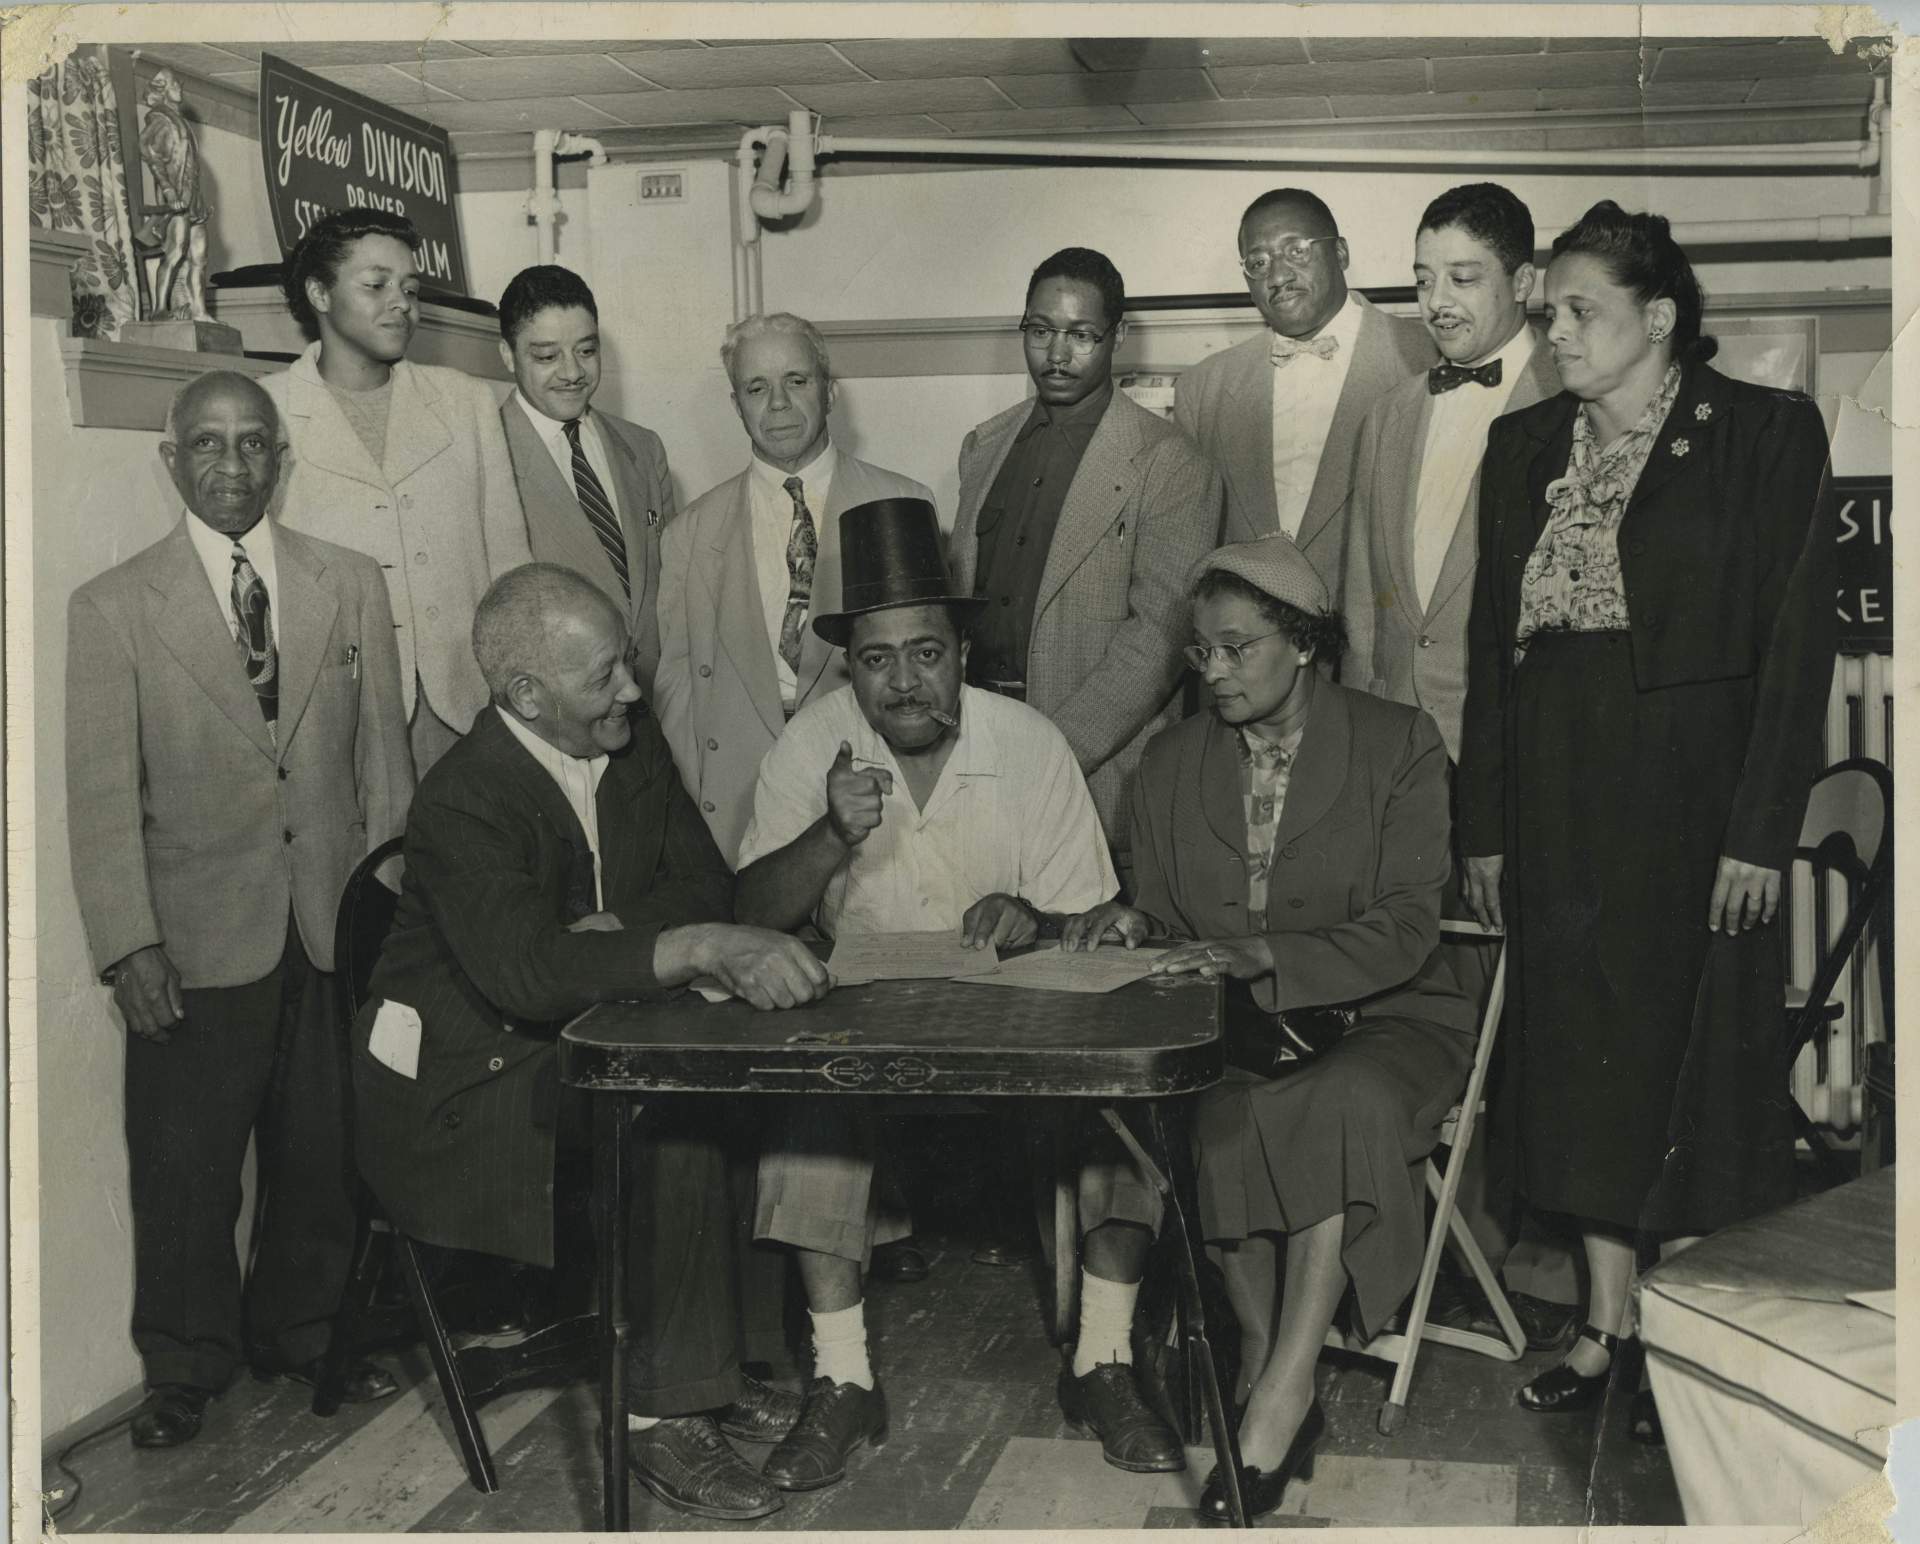 Brent, man in top hat [Count Basie?], and woman at table, 8 people standing behind them